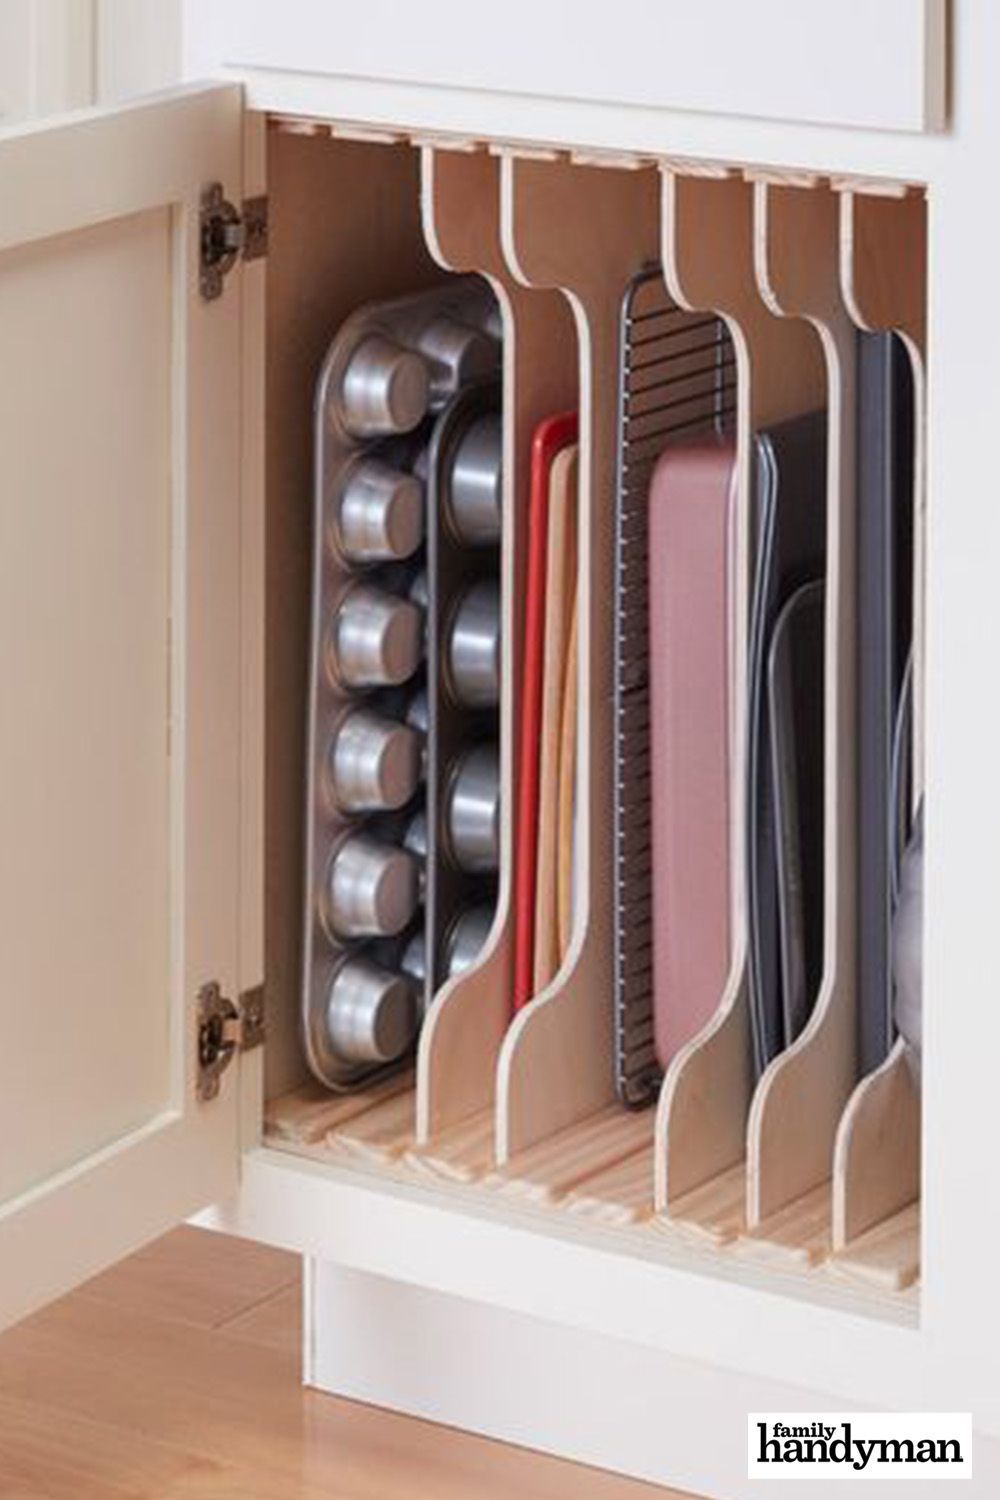 Get to know about the kitchen organizers